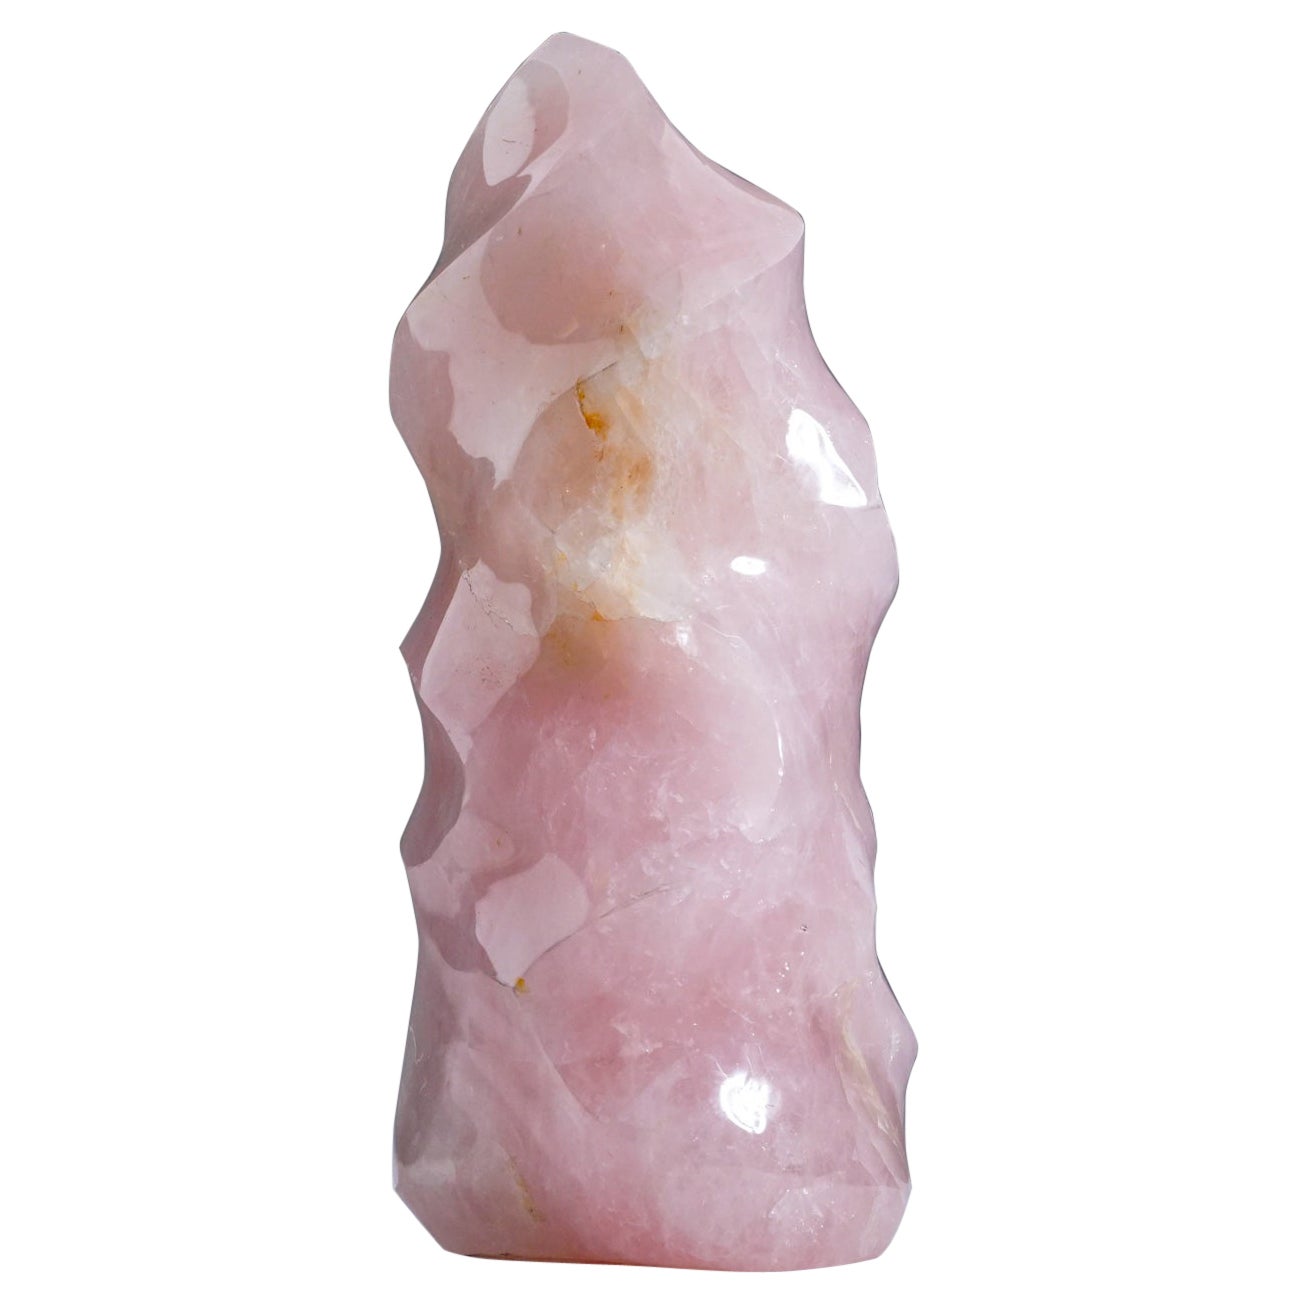 Polished Rose Quartz Flame Freeform From Brazil (11.6 lbs) For Sale